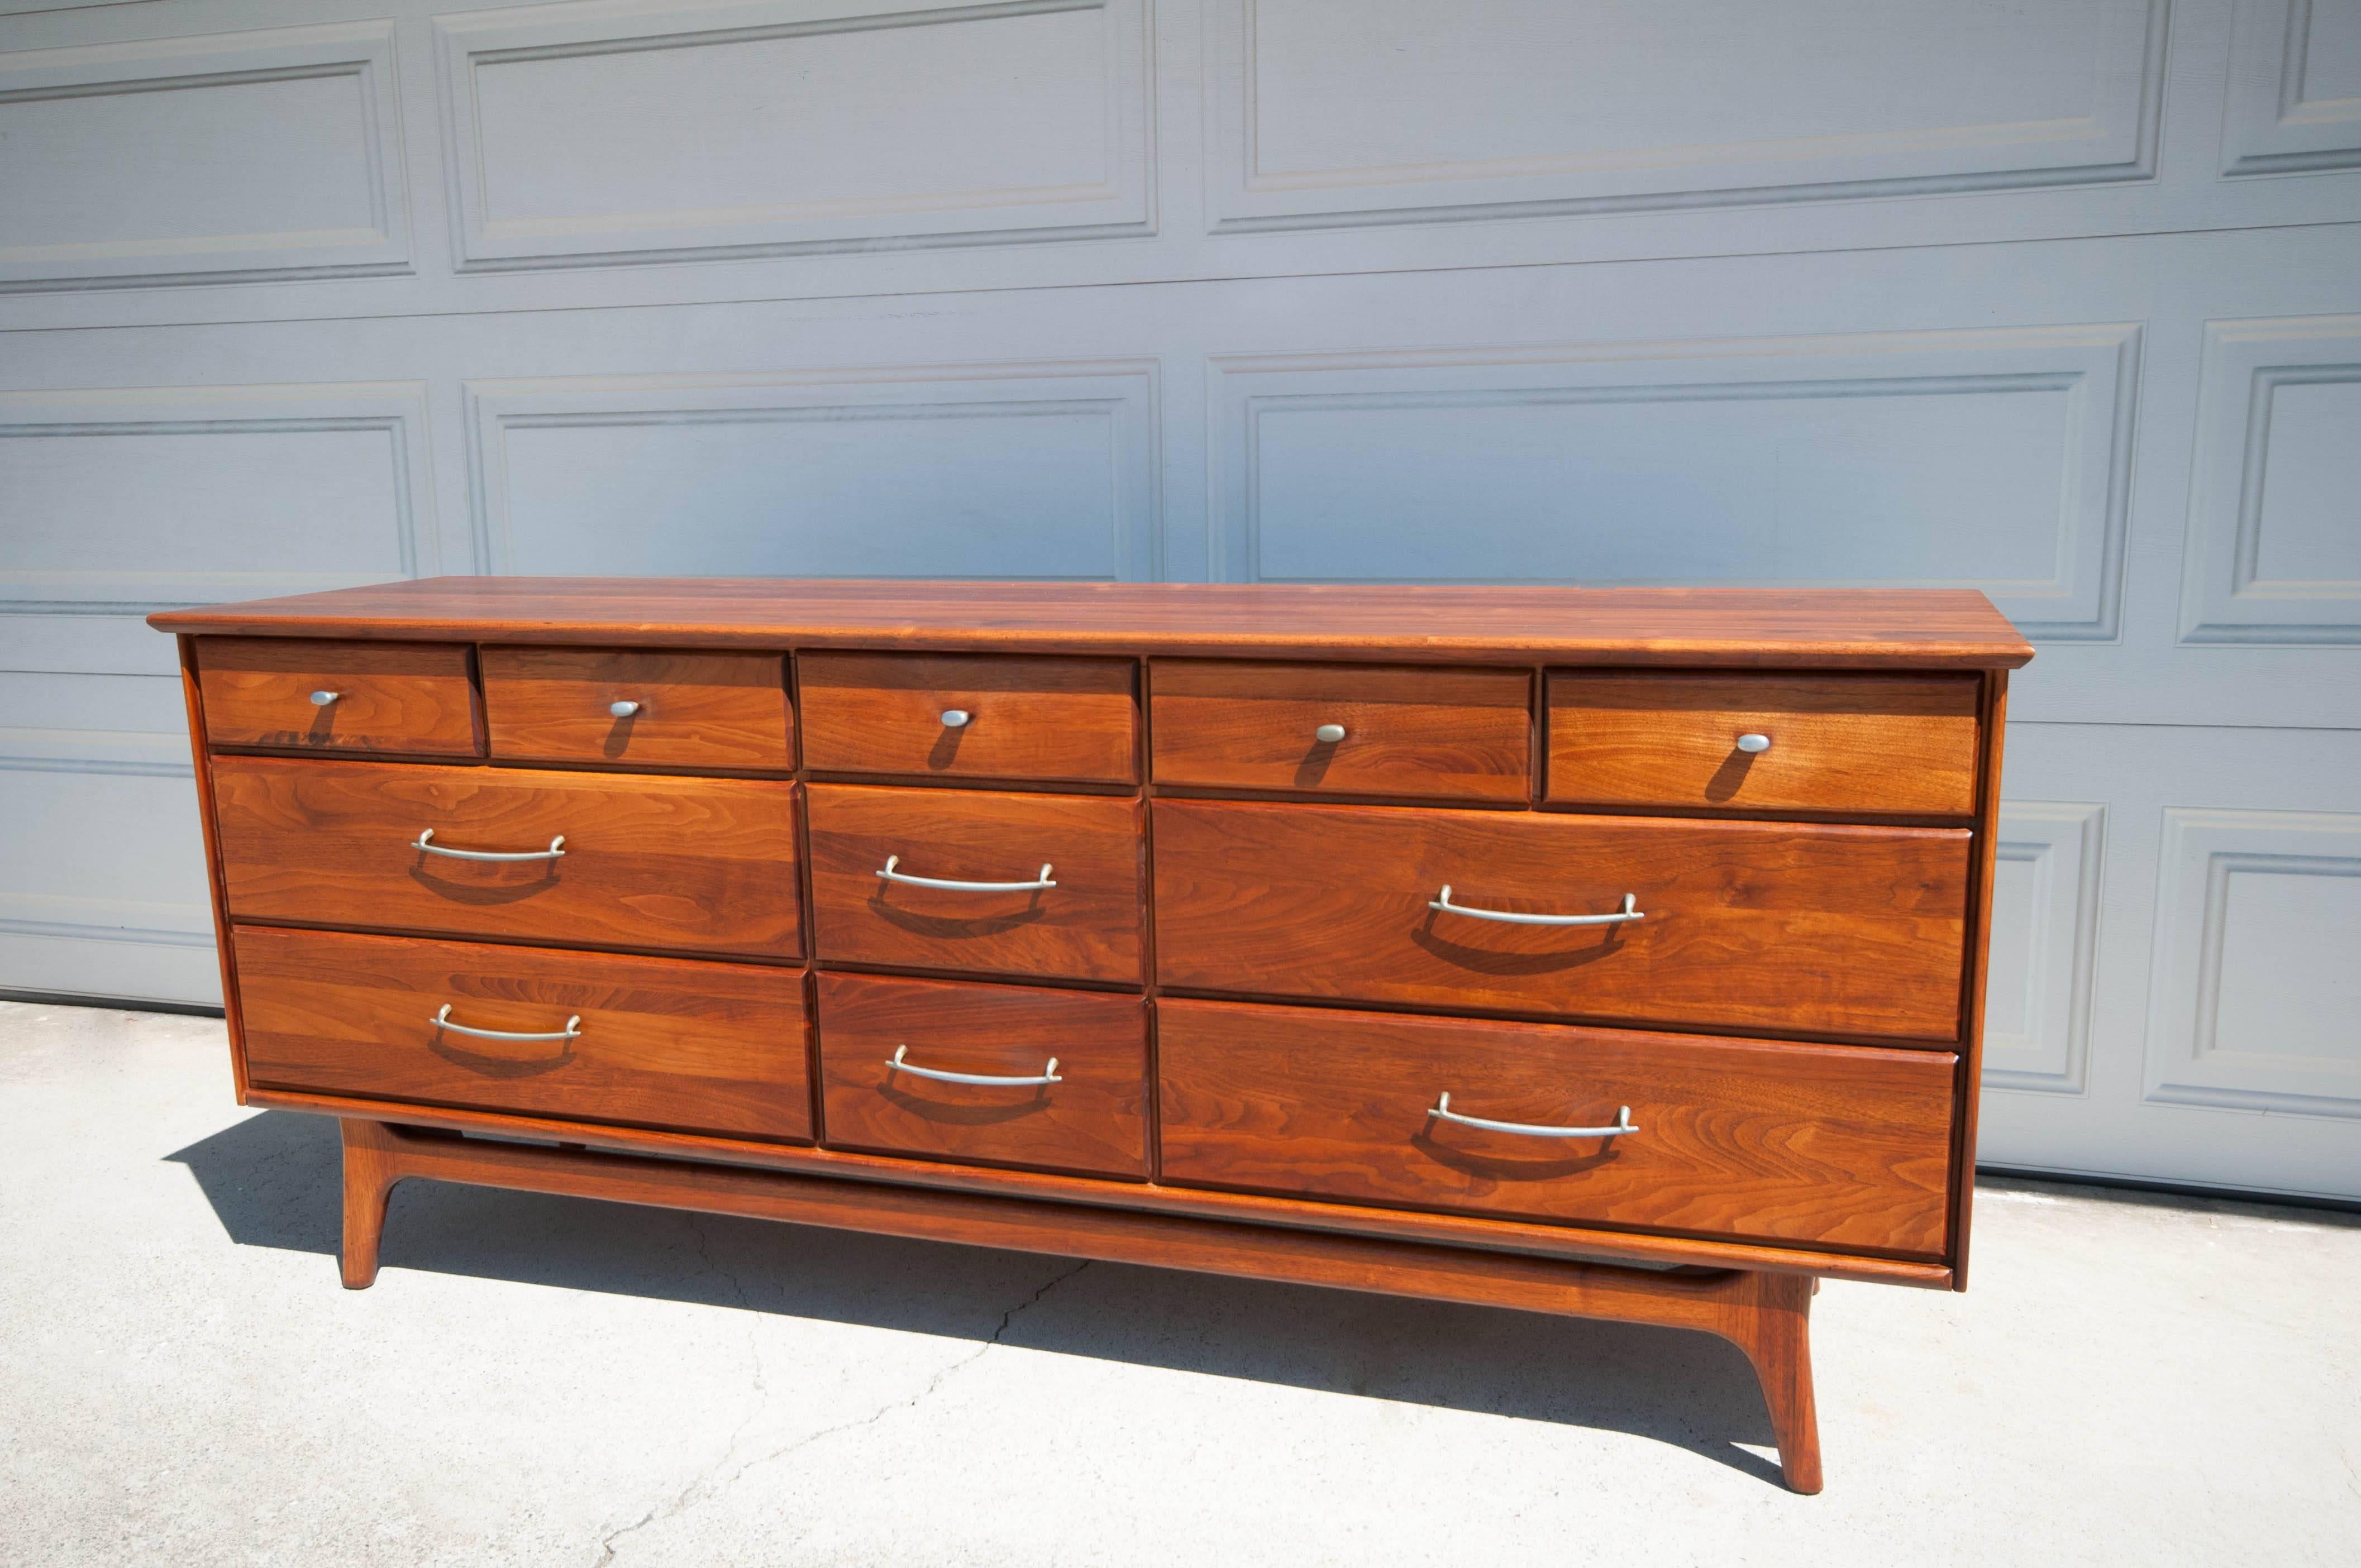 Midcentury Ace-Hi Dresser in solid planked walnut. This piece features eleven spacious drawers with pewter pulls. Can also be used as an entertainment console or credenza.